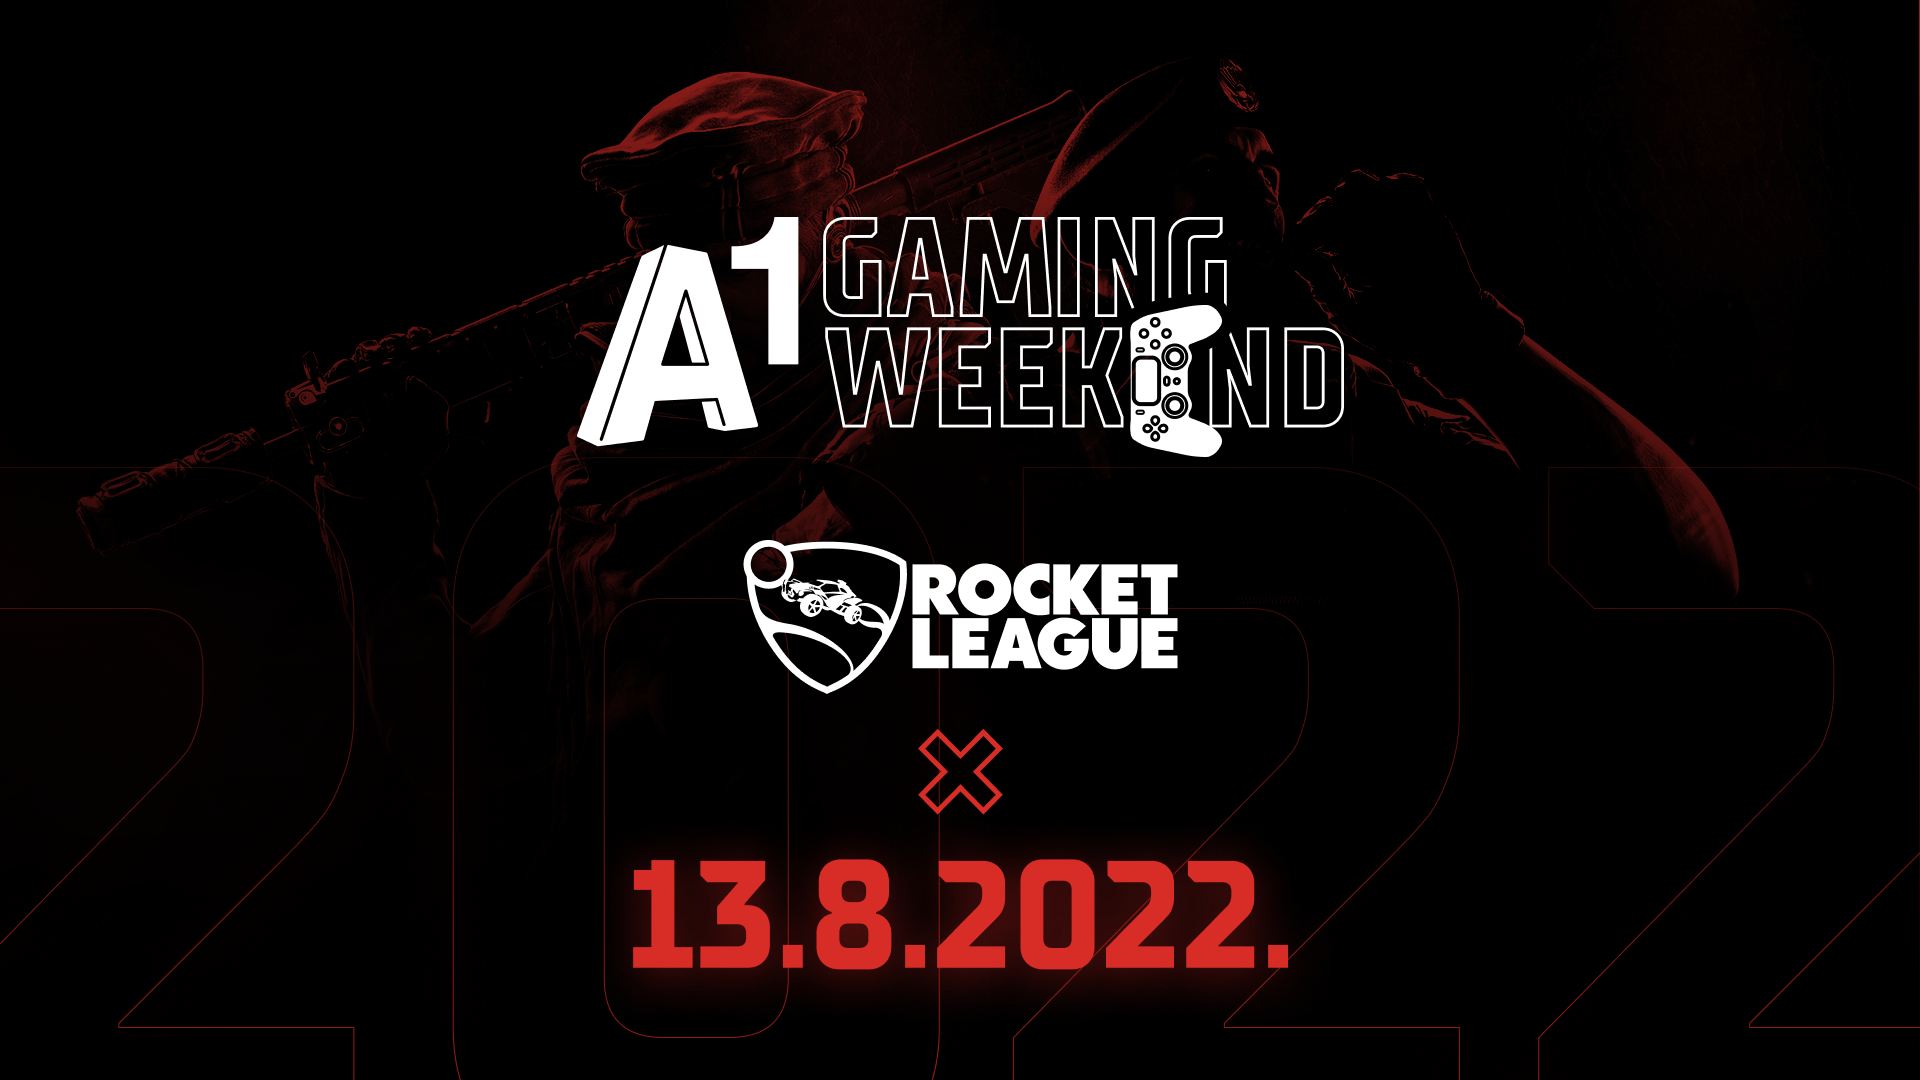 Join A1 Gaming Weekend FIFA Mobile Tournament! » A1 Adria League